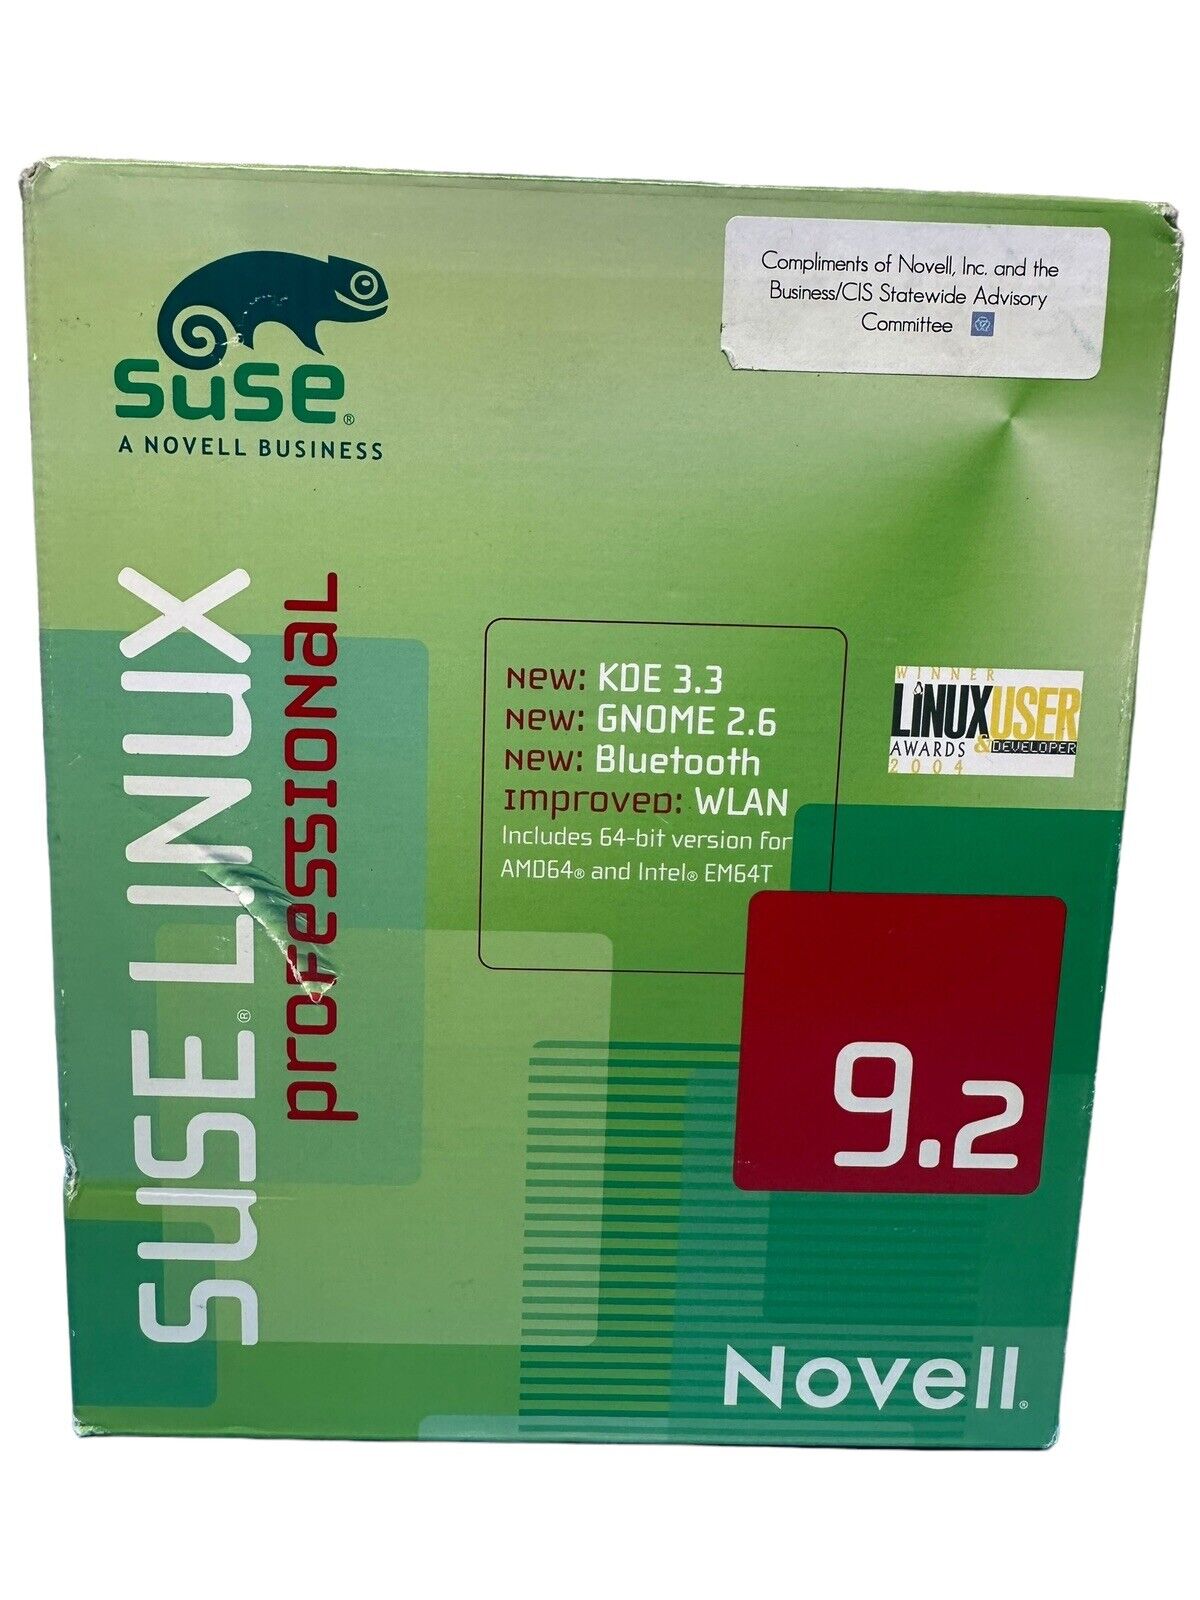 Novell SUSE LINUX Professional 9.2 Operating System Software New Sealed In Box